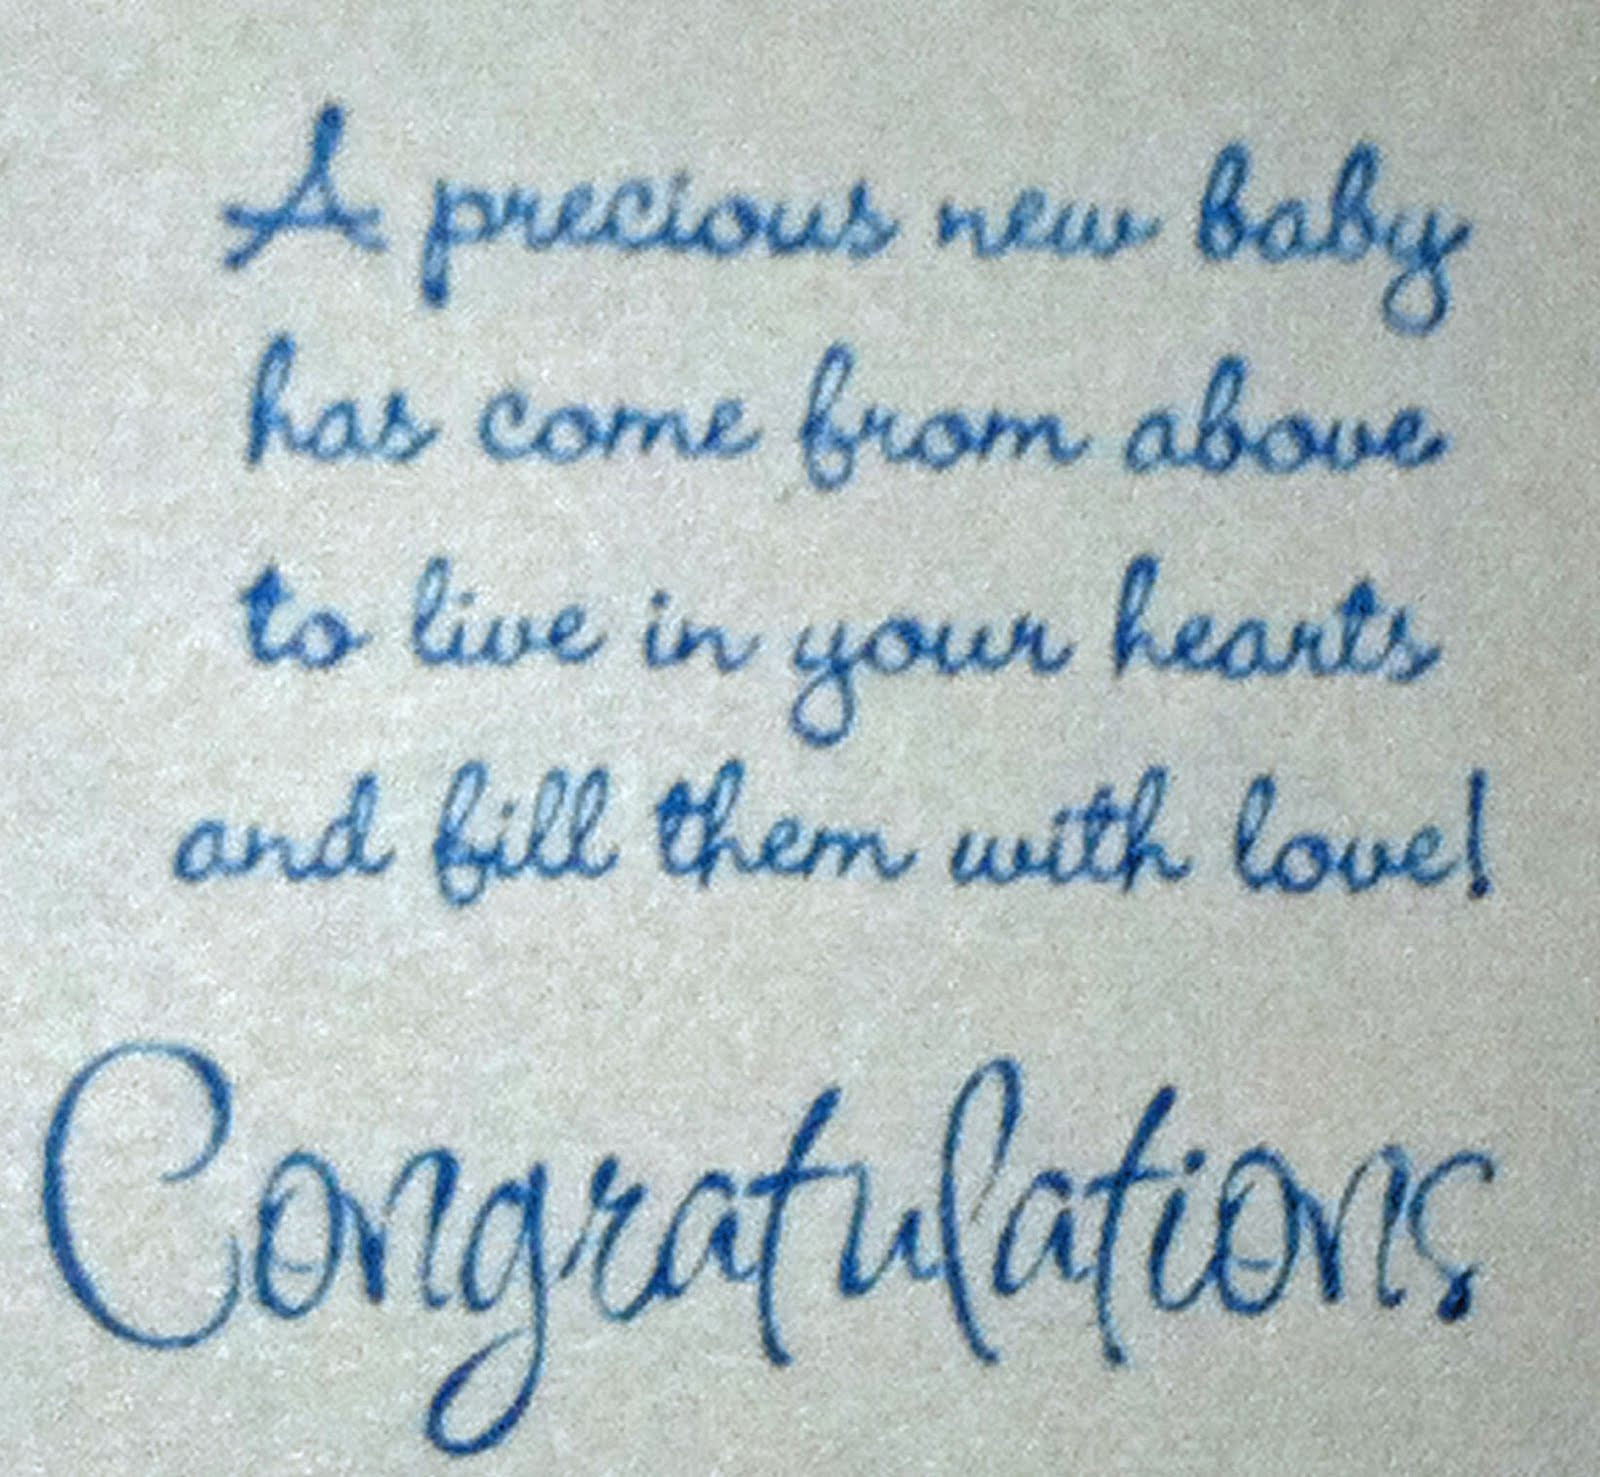 New Baby Congratulation Quotes
 Michelle s MBellishments Happy New Baby